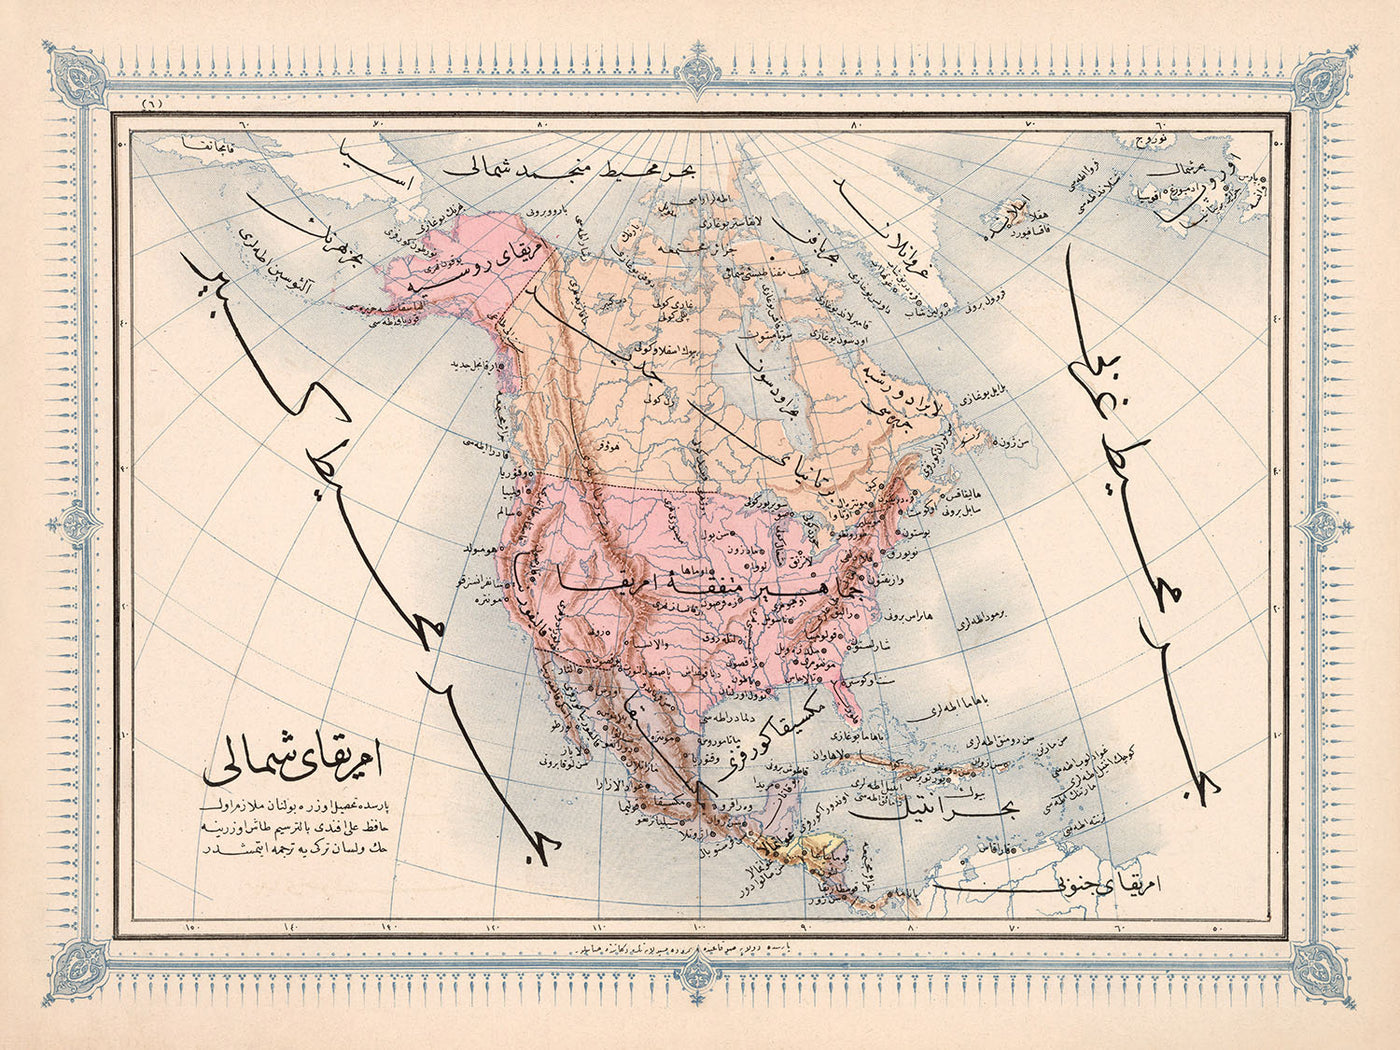 Old Arabic Map of North America by Esref, 1868: New York, Rocky Mountains, Mississippi River, Great Lakes, Mexico City